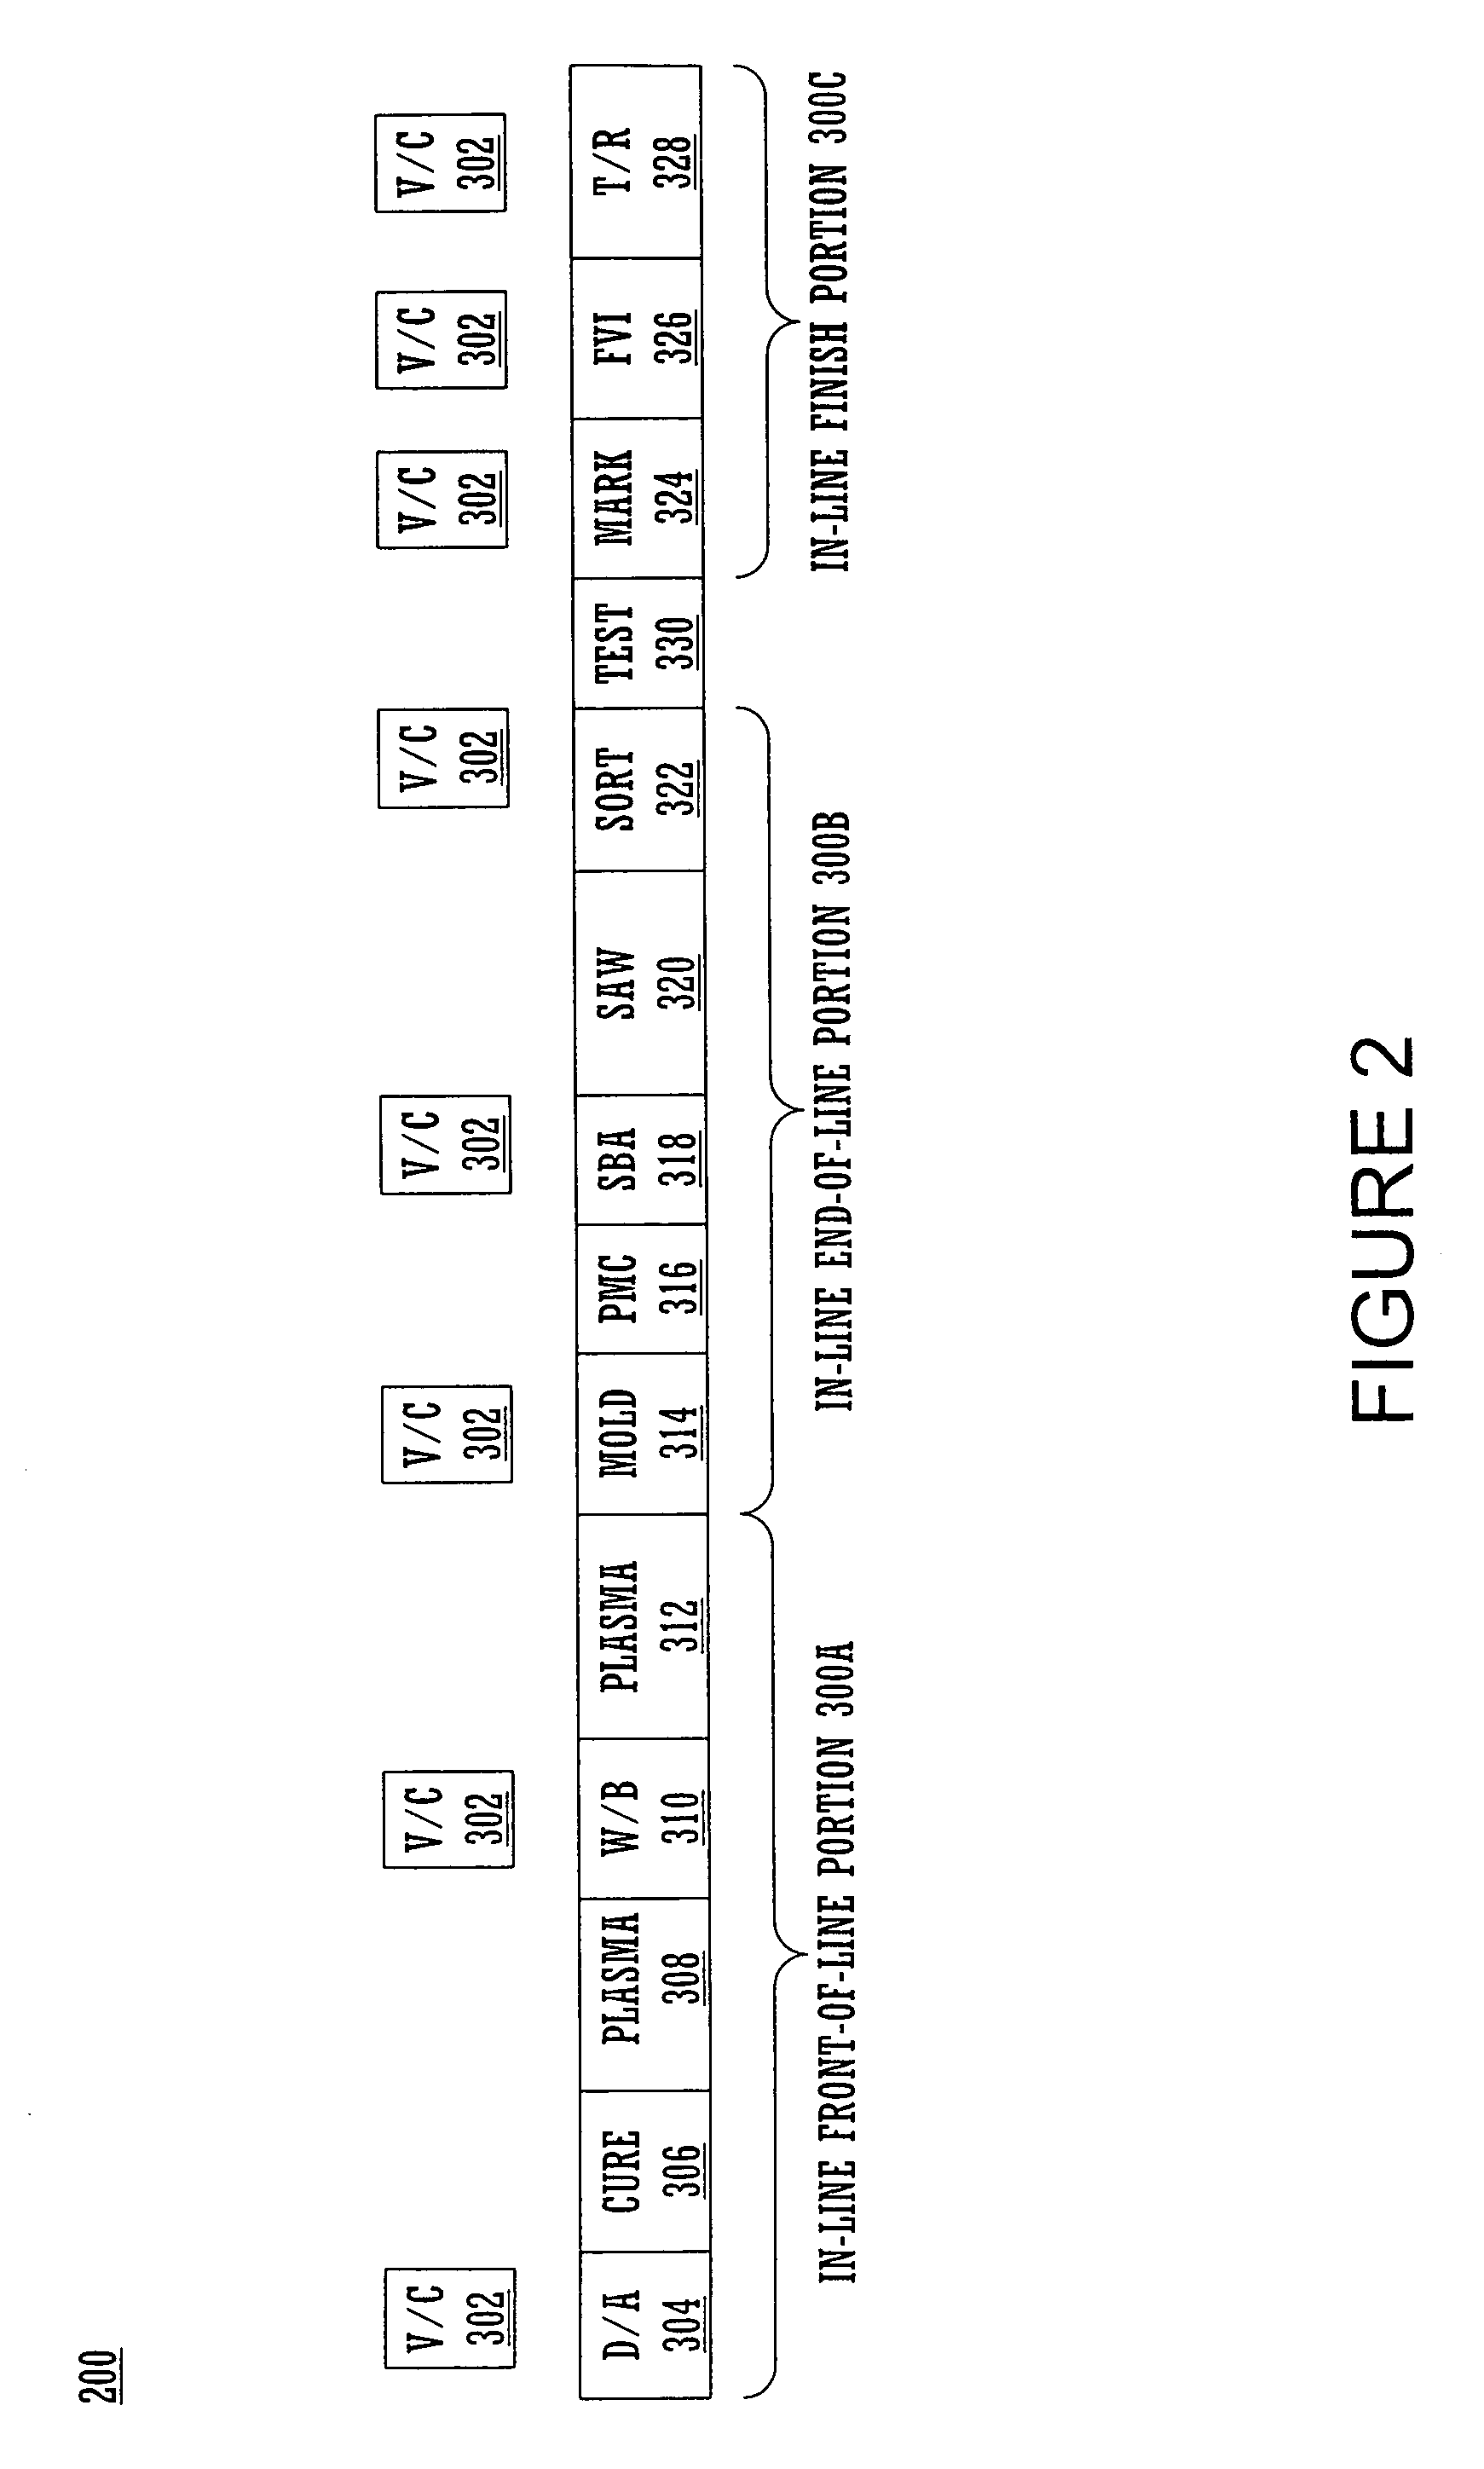 Method and system for universal packaging in conjunction with a back-end integrated circuit manufacturing process